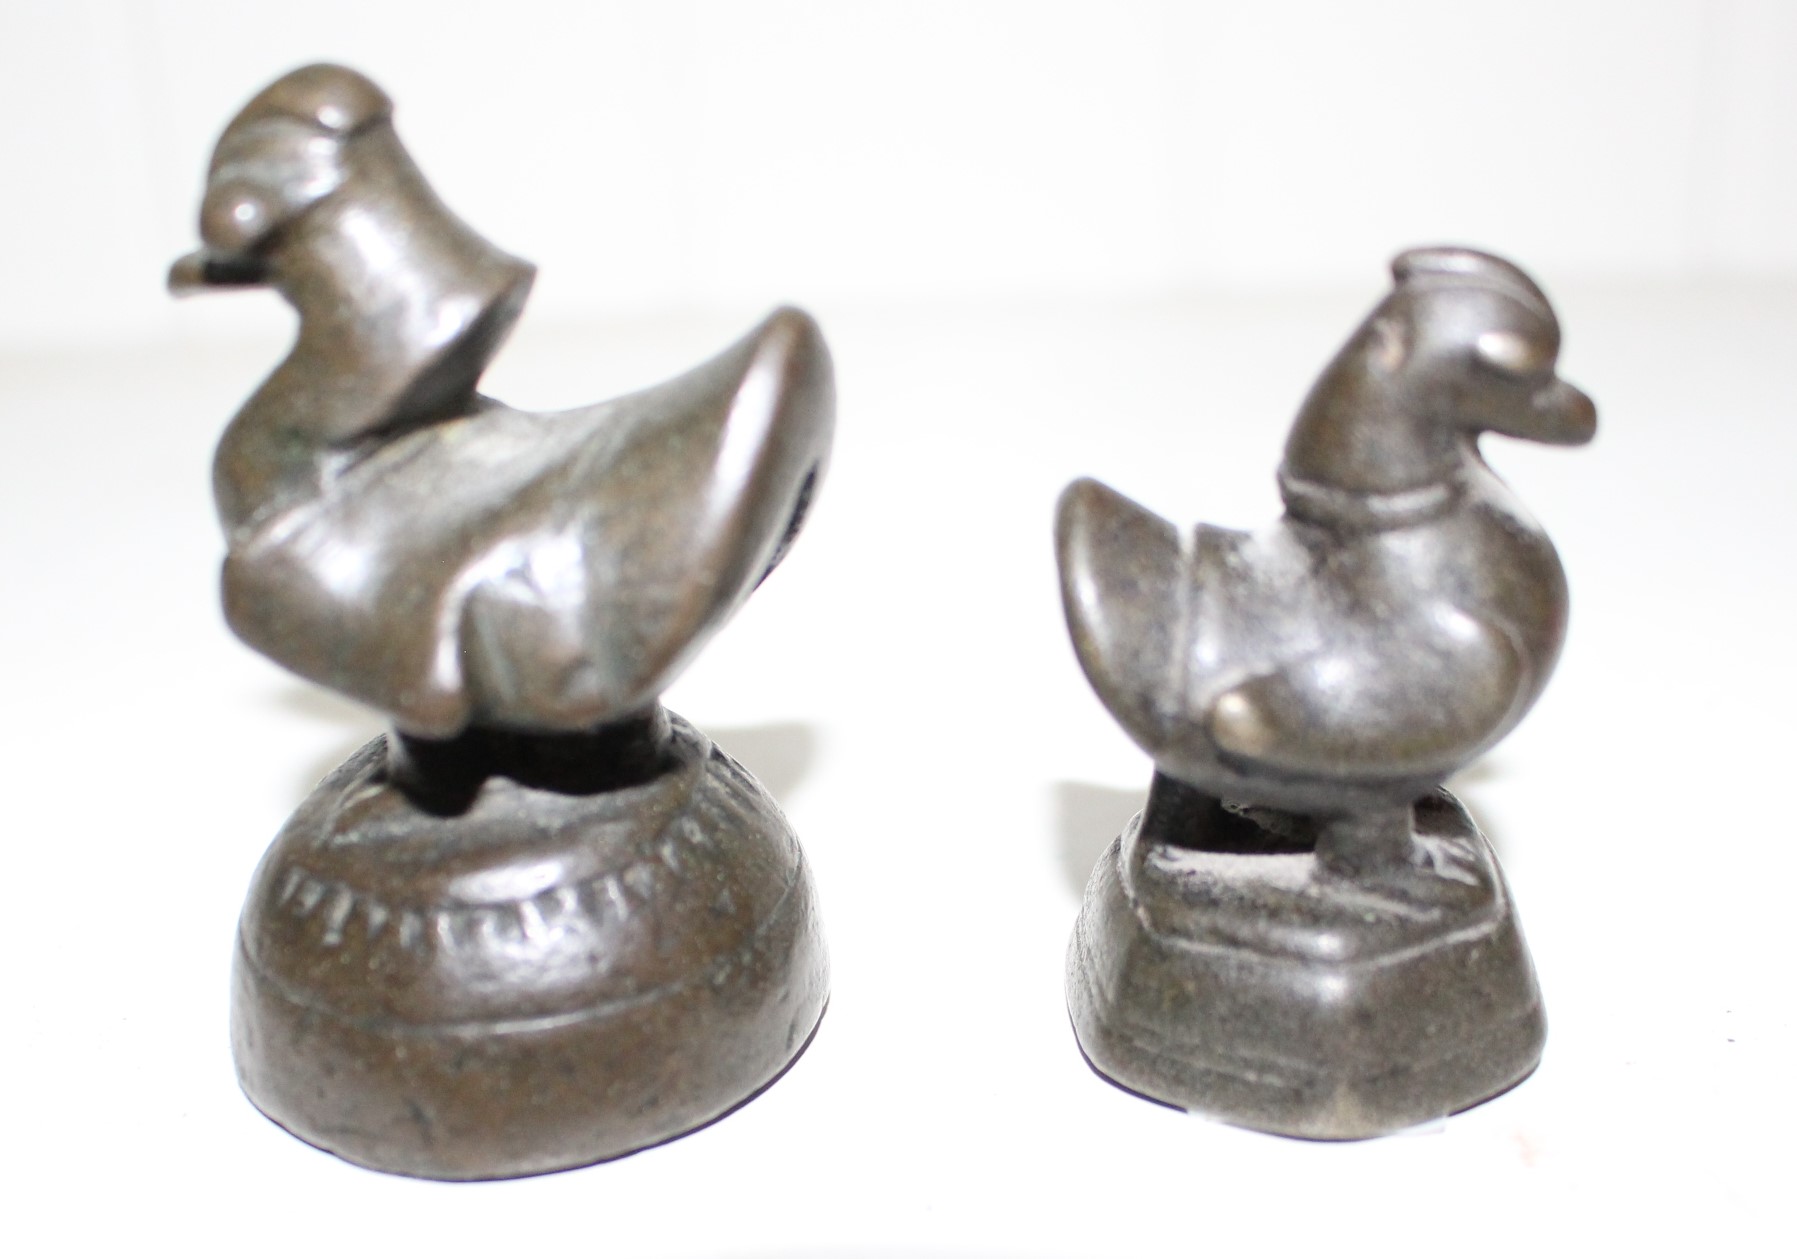 Two Burmese bronze opium weights in sizes, 6.5cm high - Image 2 of 2